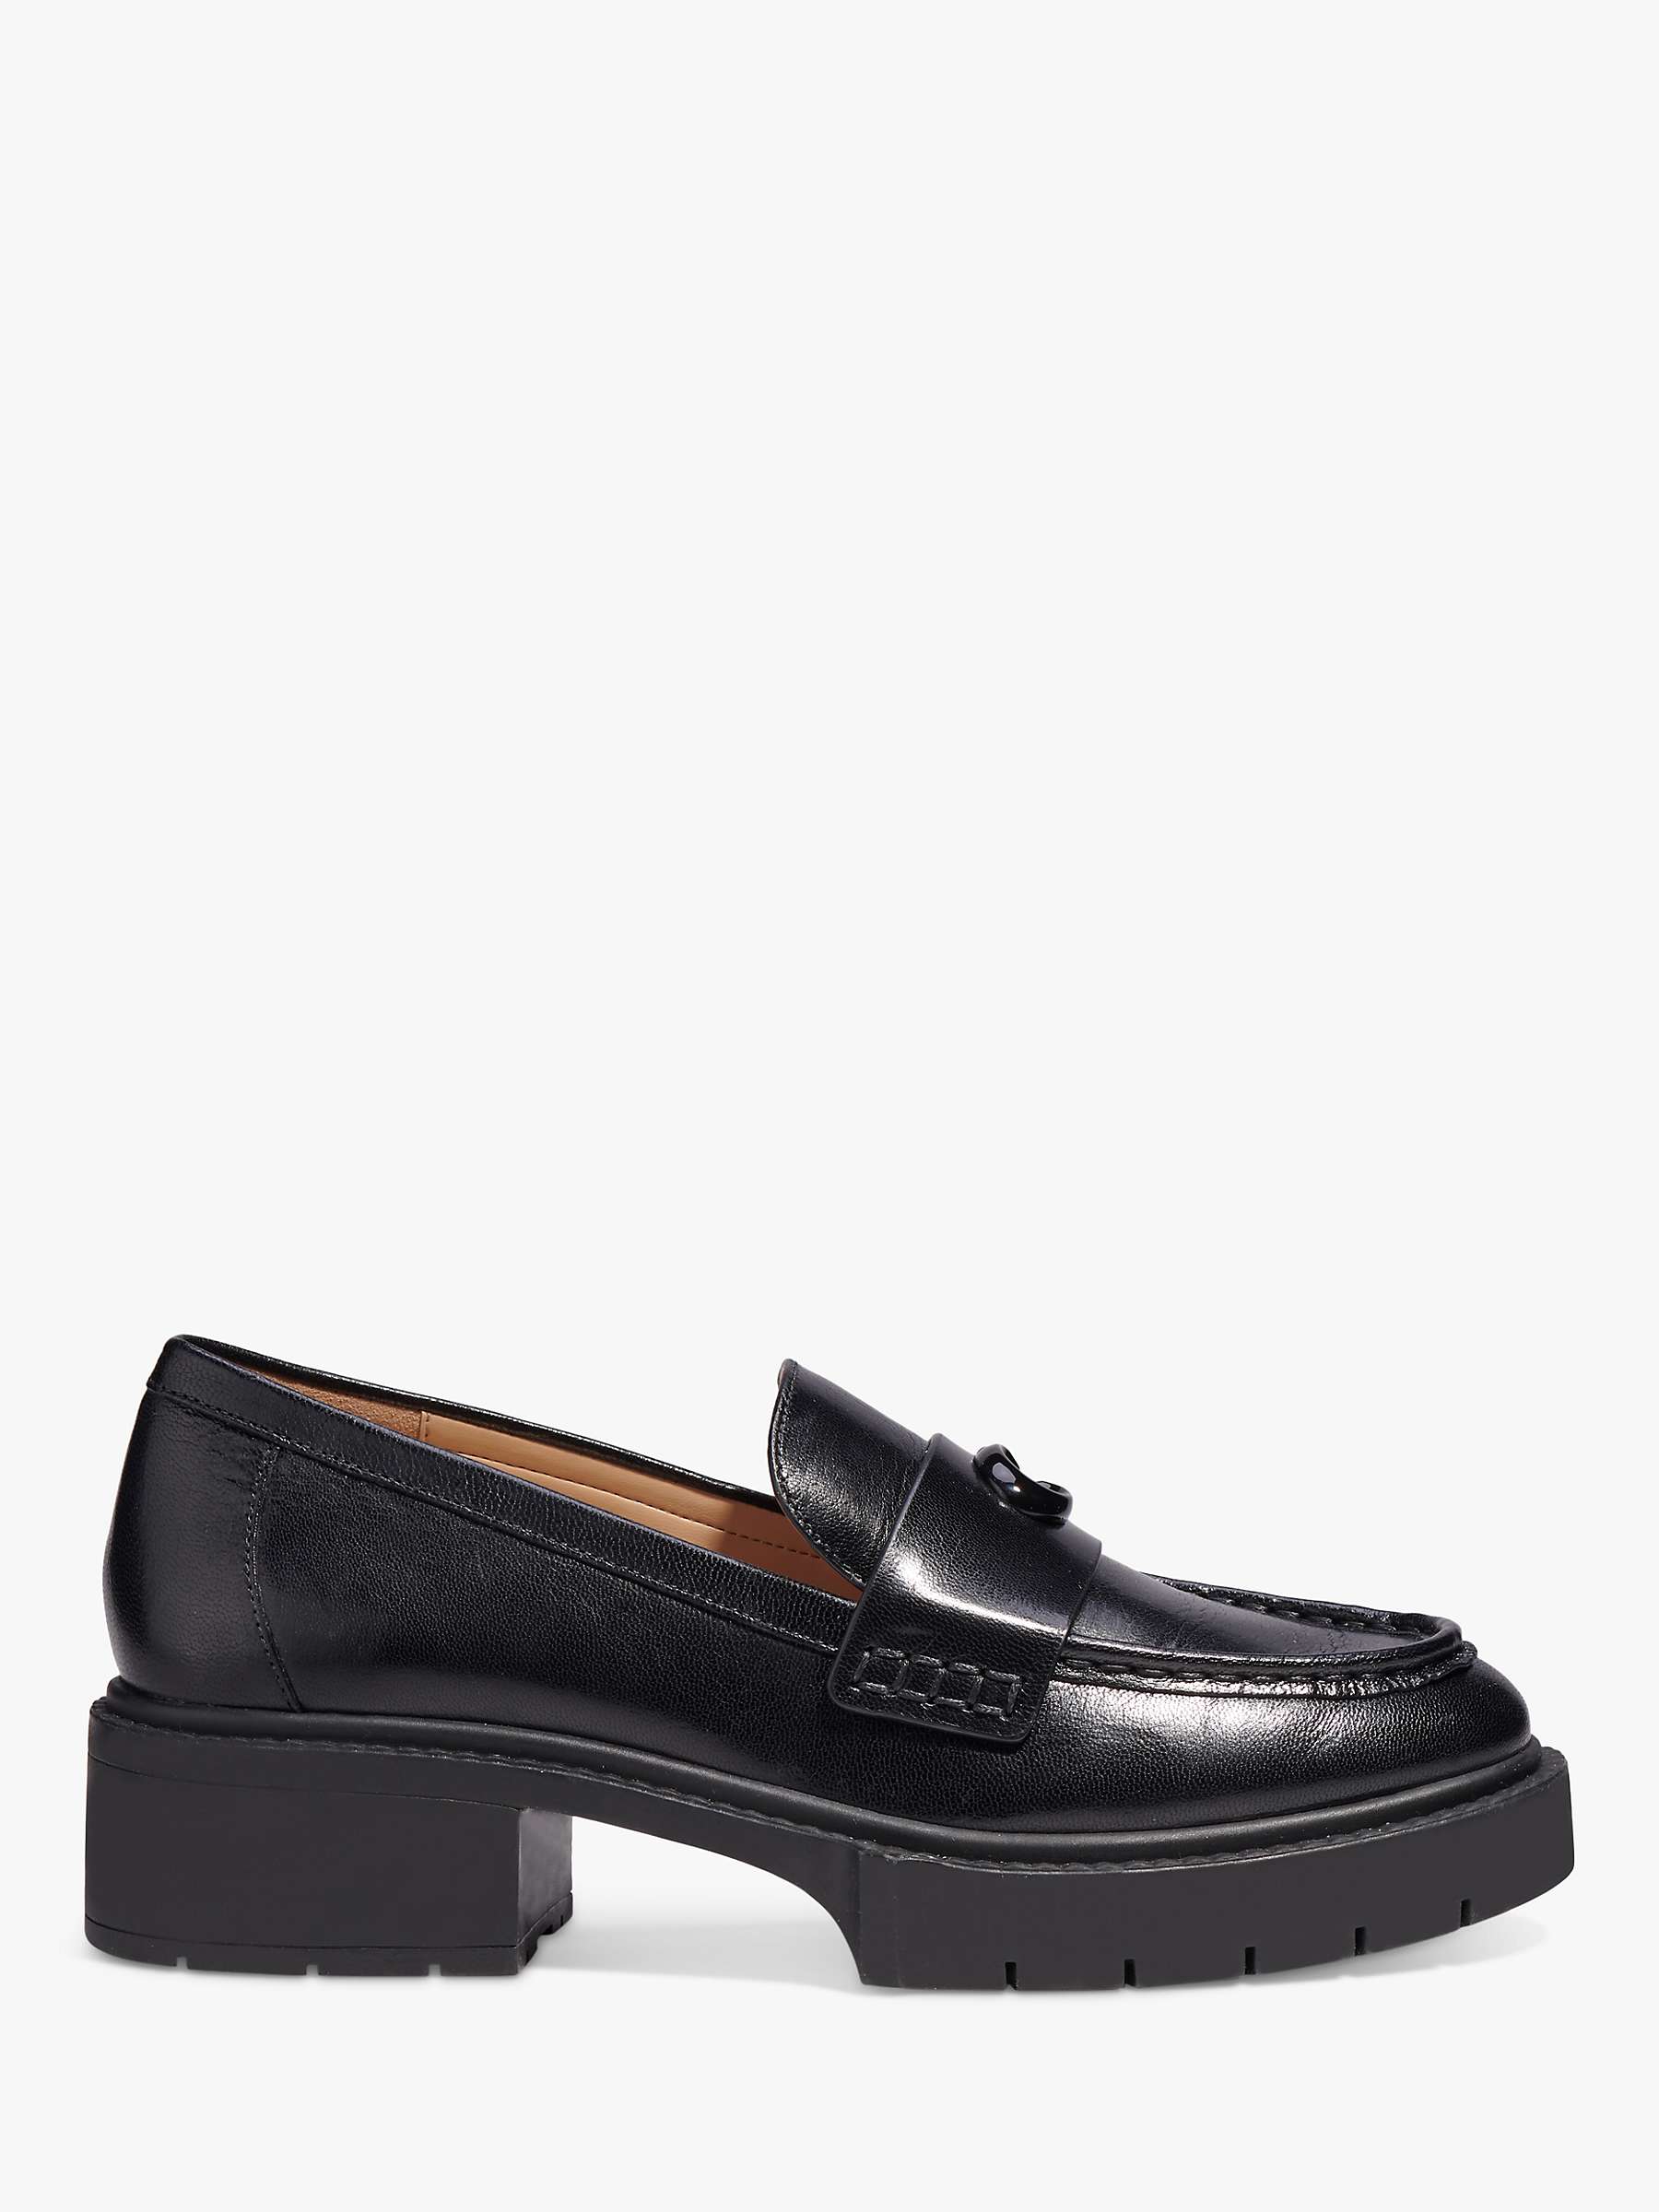 Buy Coach Leah Leather Loafers Online at johnlewis.com